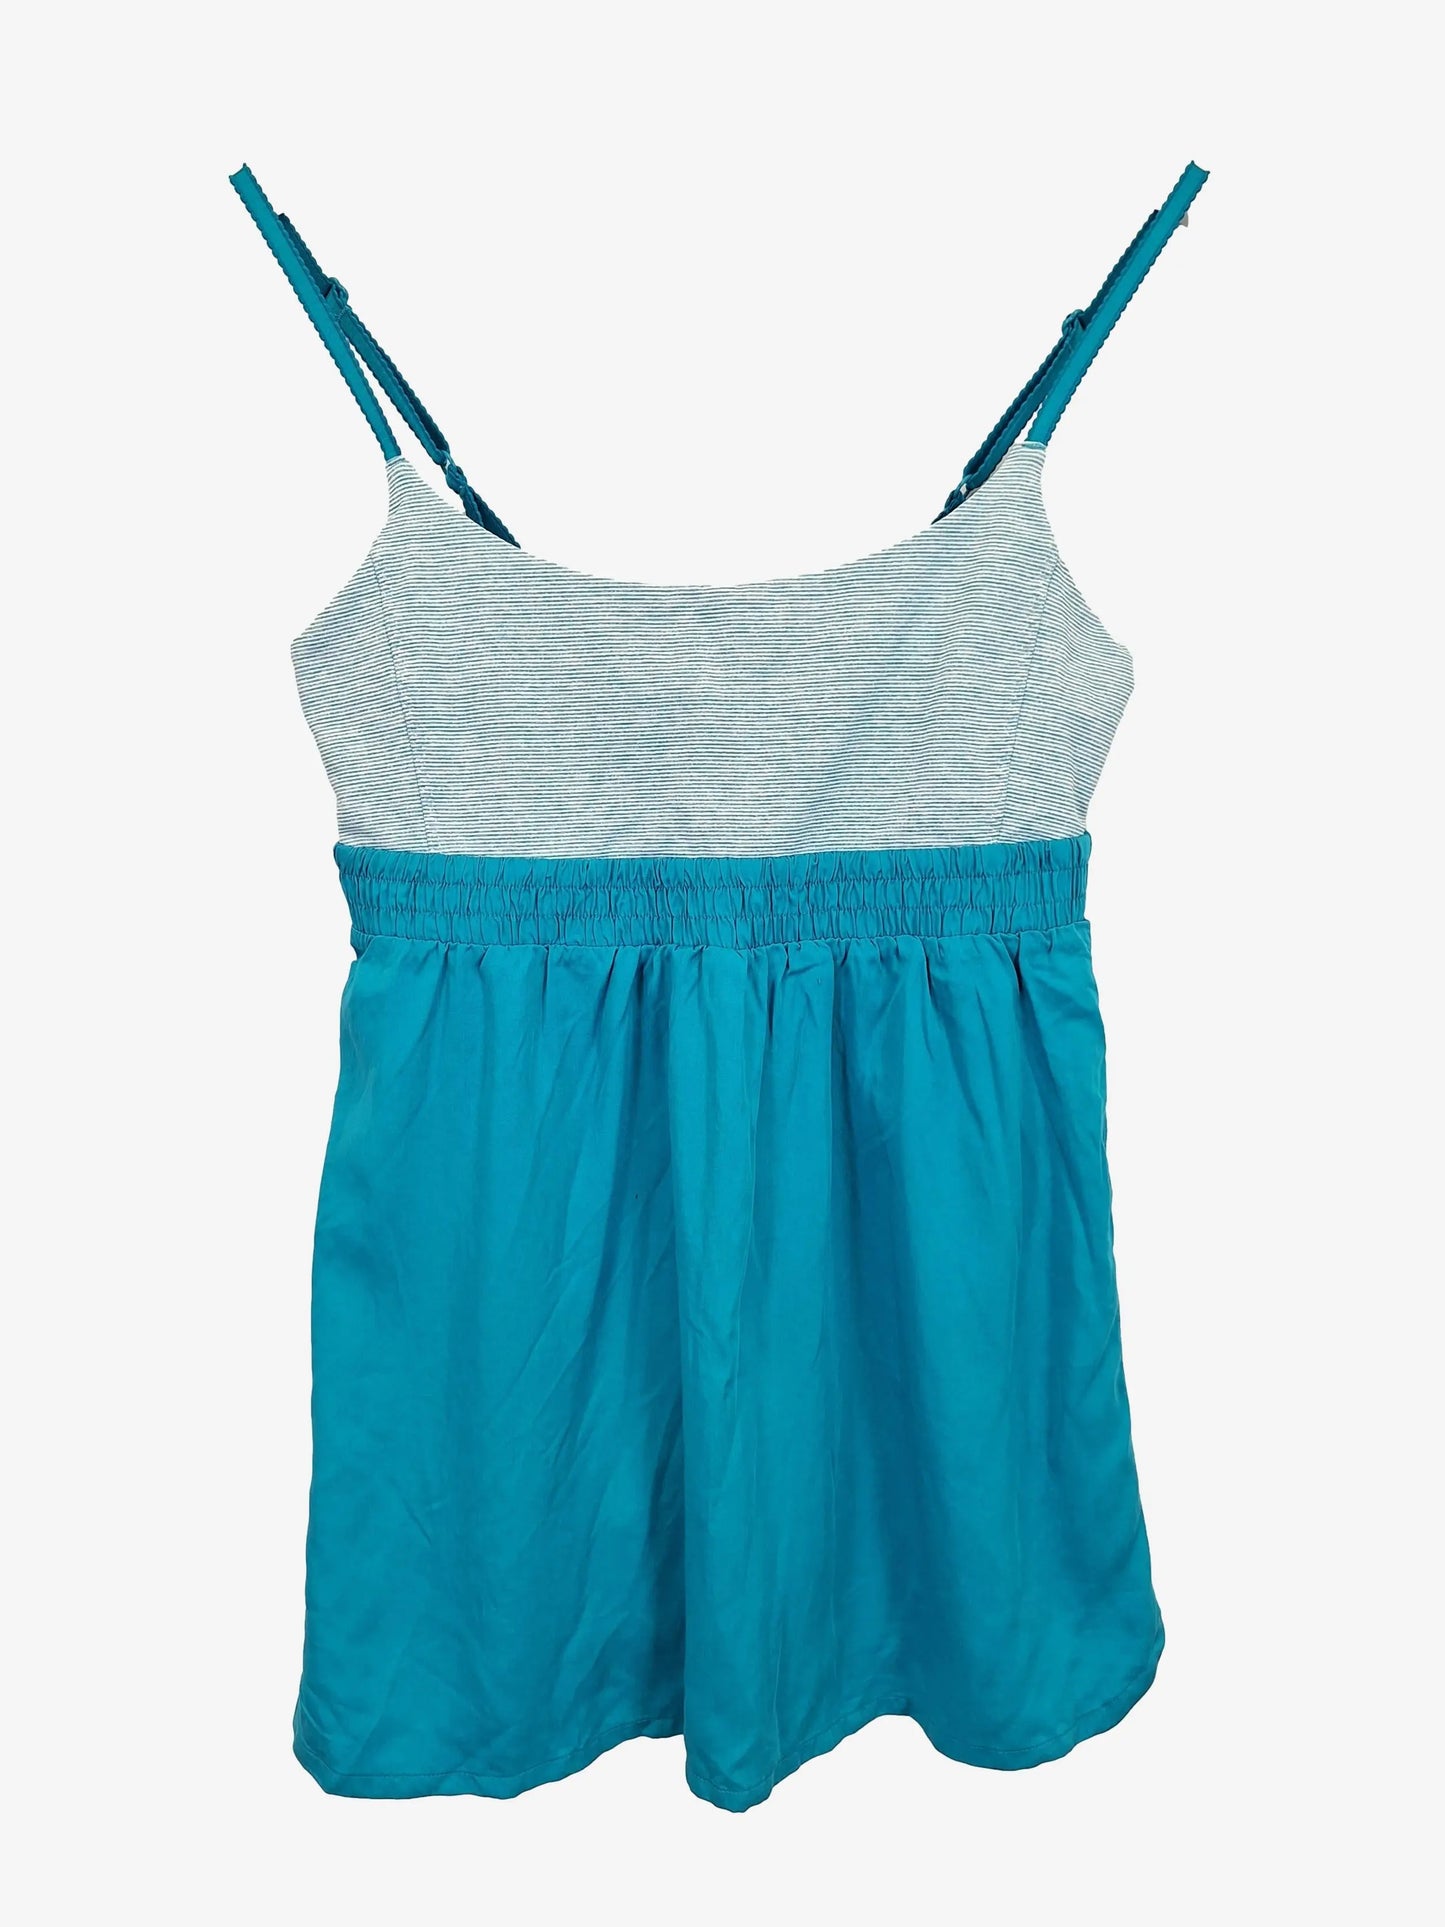 Lululemon Active Aqua Top Size 12 by SwapUp-Online Second Hand Store-Online Thrift Store